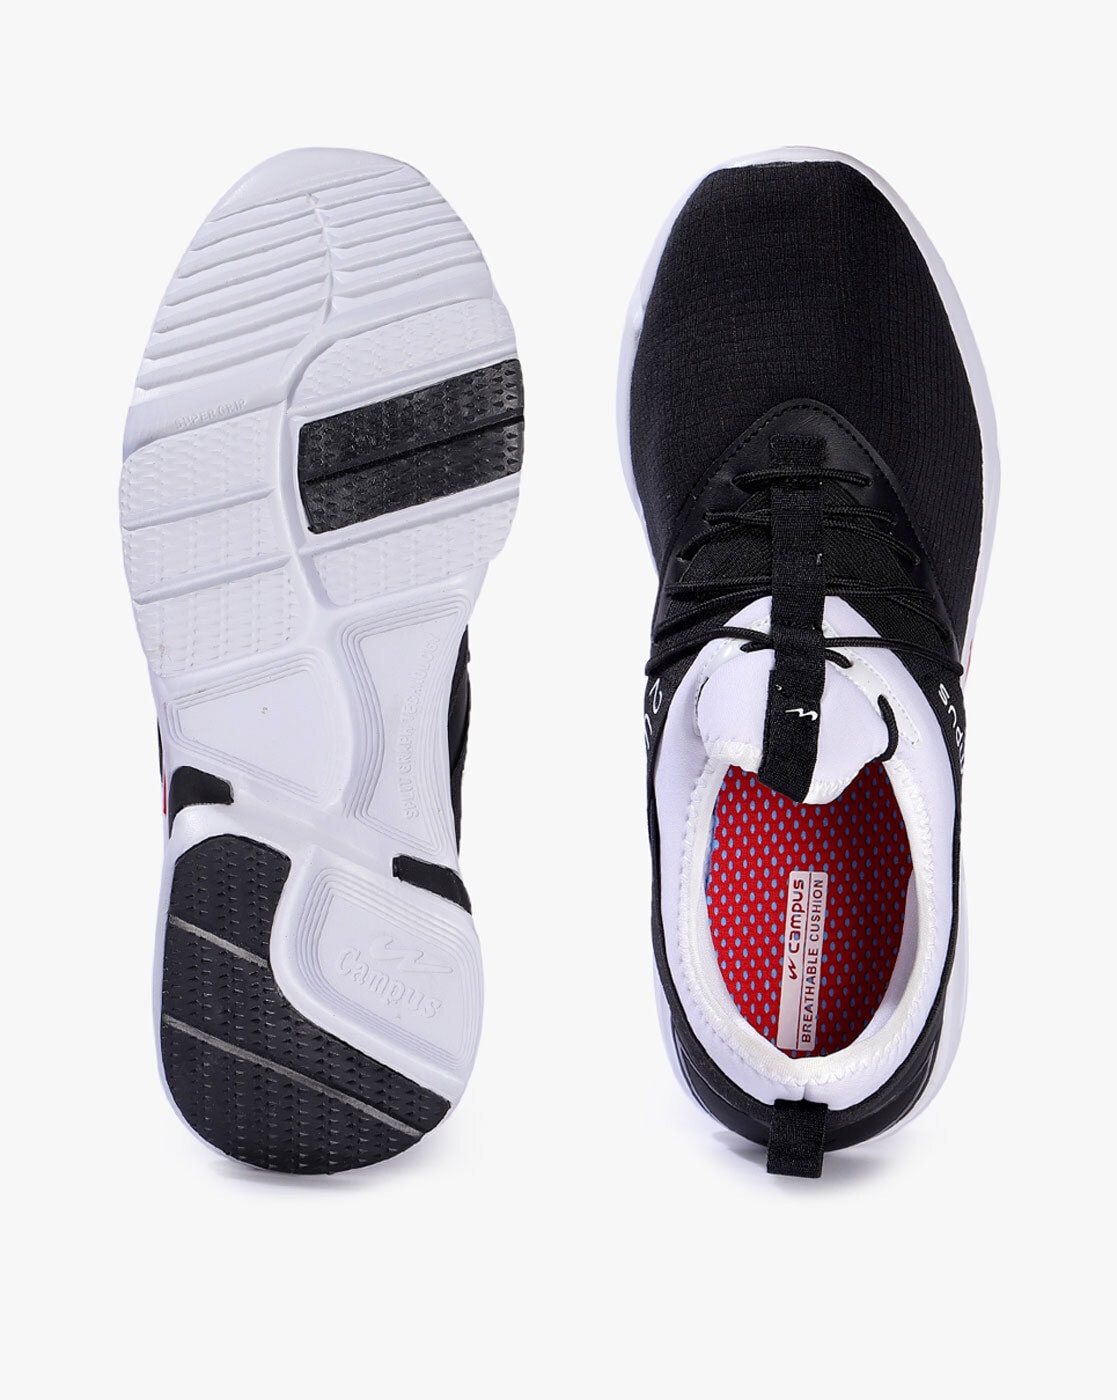 CAMPUS Roof Men's Running Shoes (Size- 9, Black) in Delhi at best price by  Kangarooz Ltd - Justdial